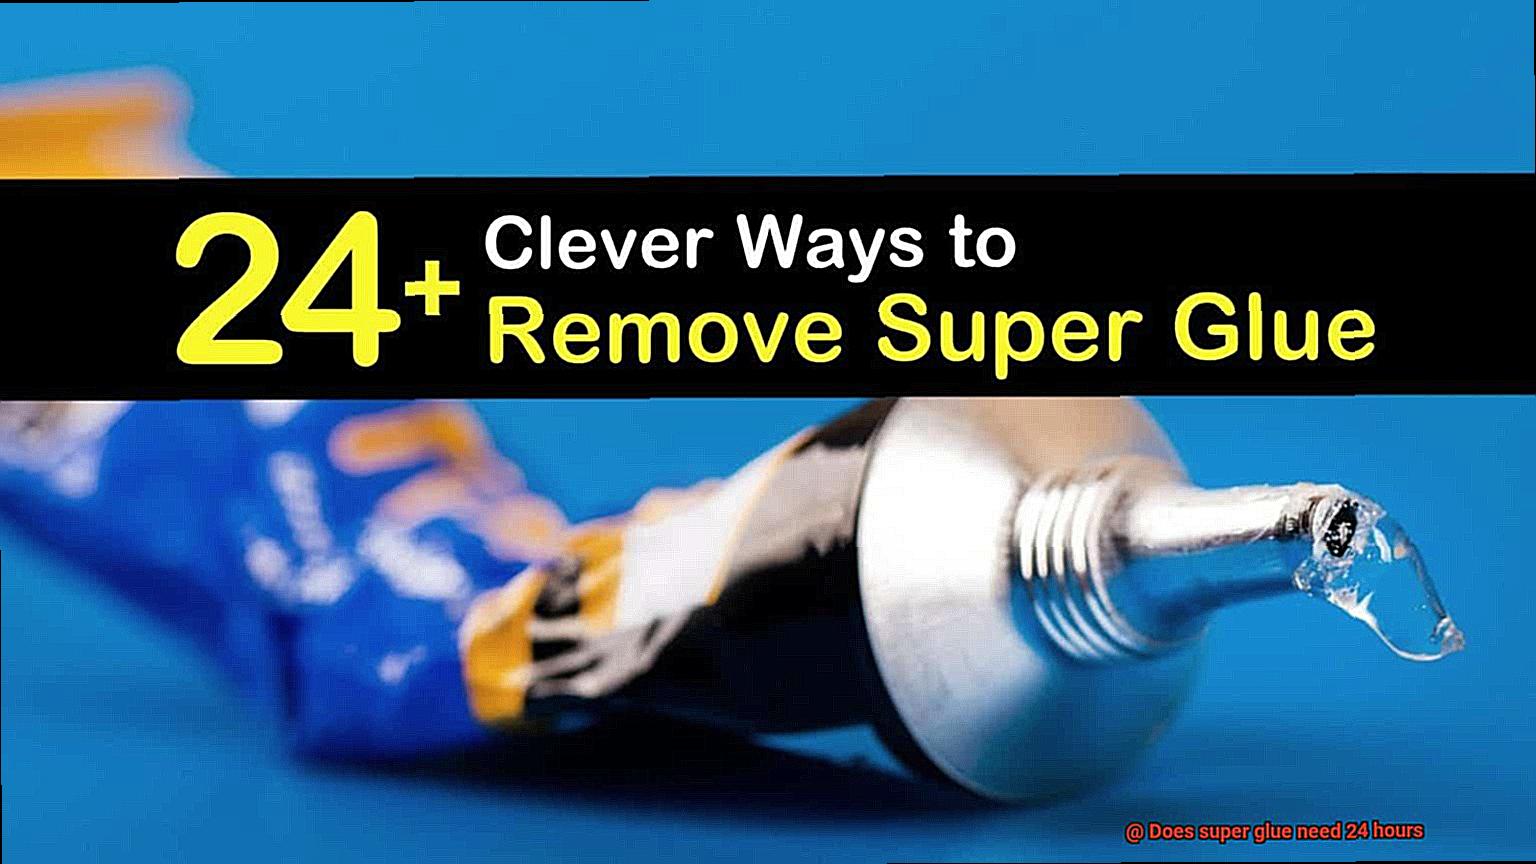 Does super glue need 24 hours-5